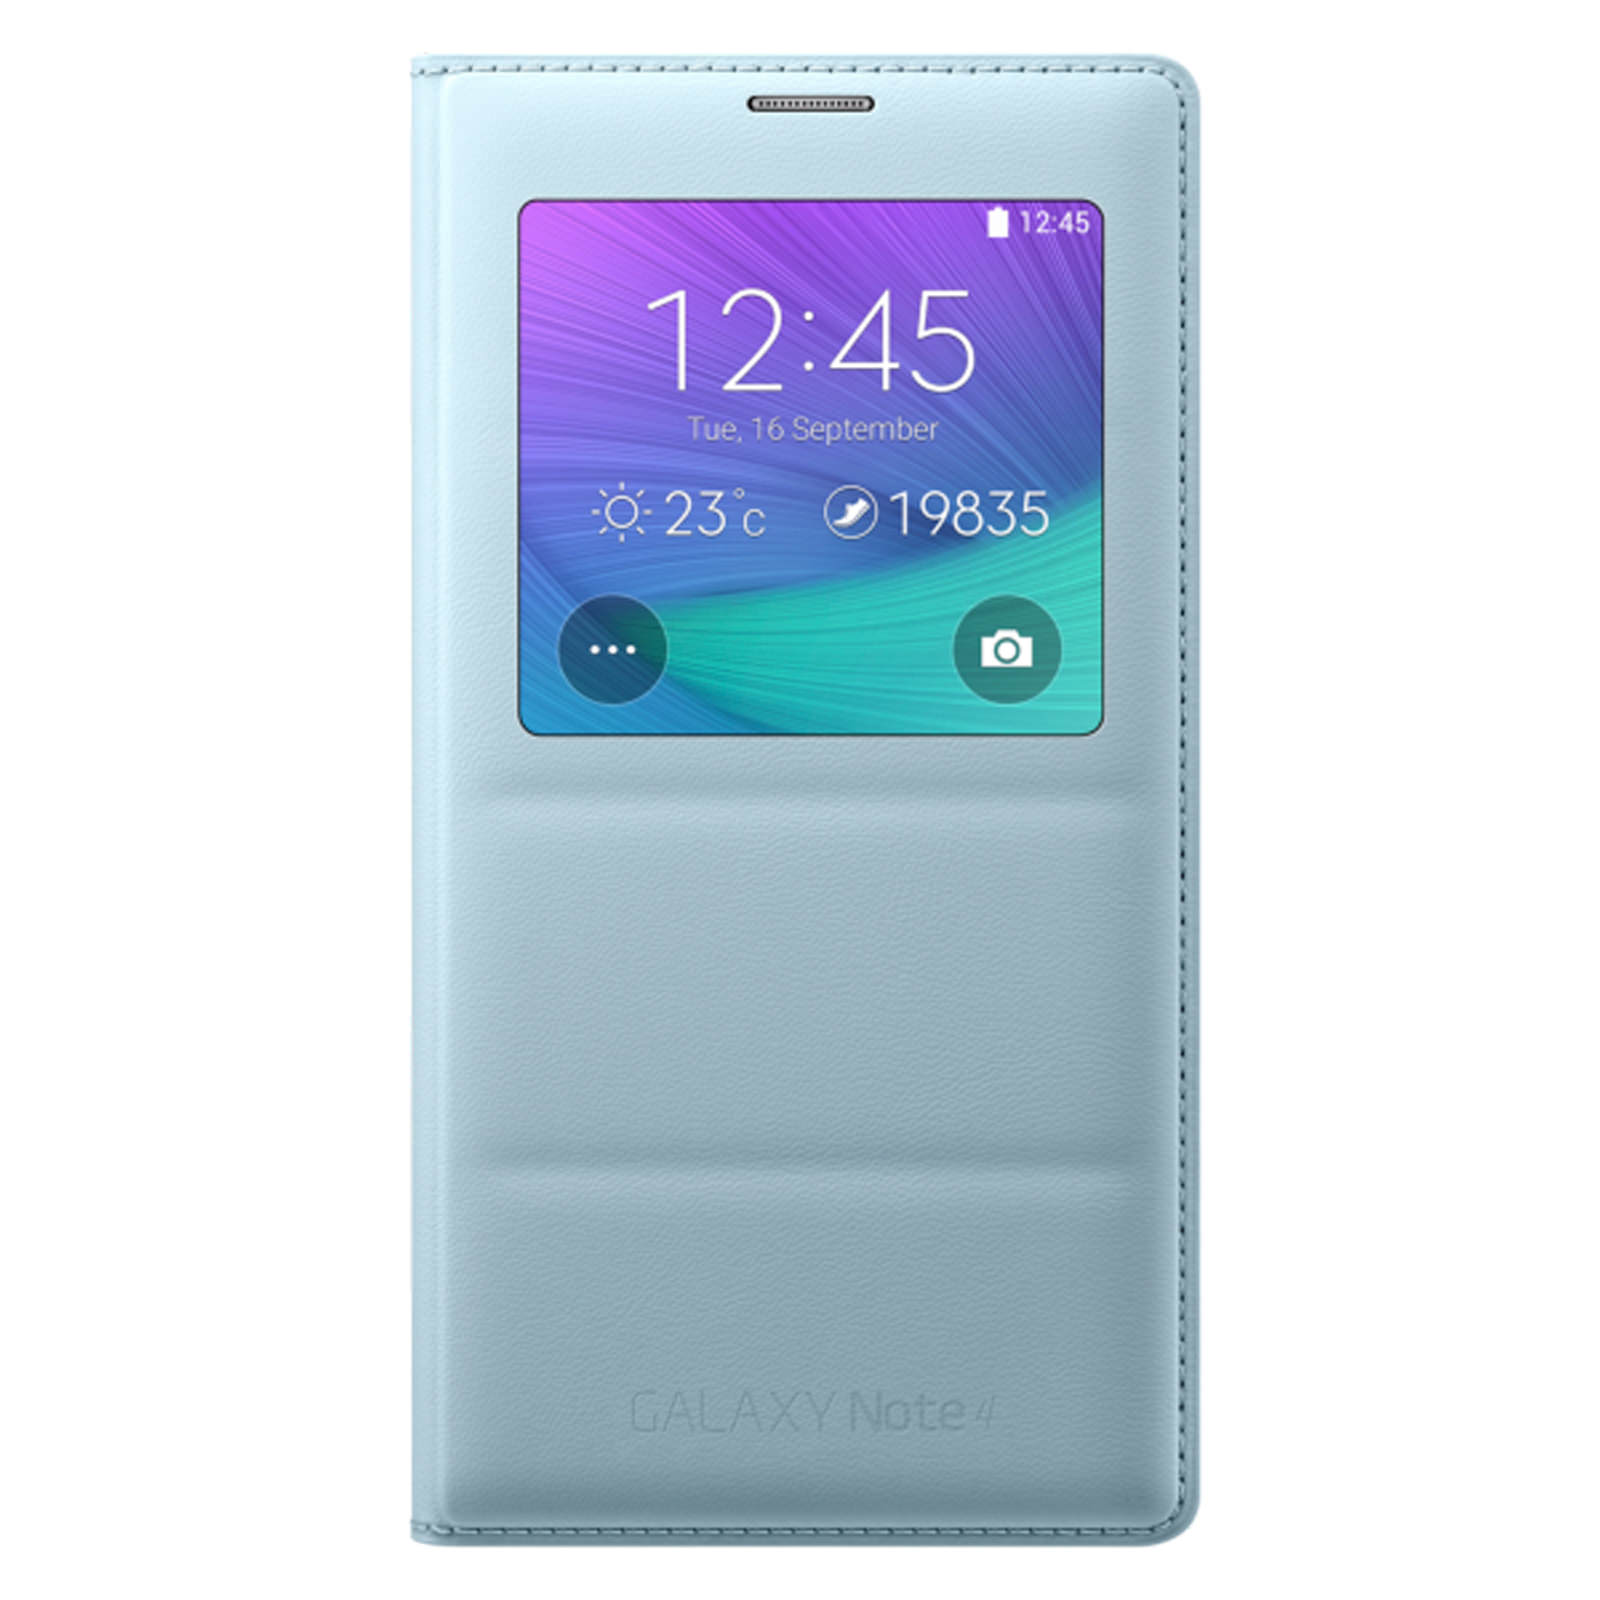 Samsung Galaxy Note 4 S View Cover – Mint Blue